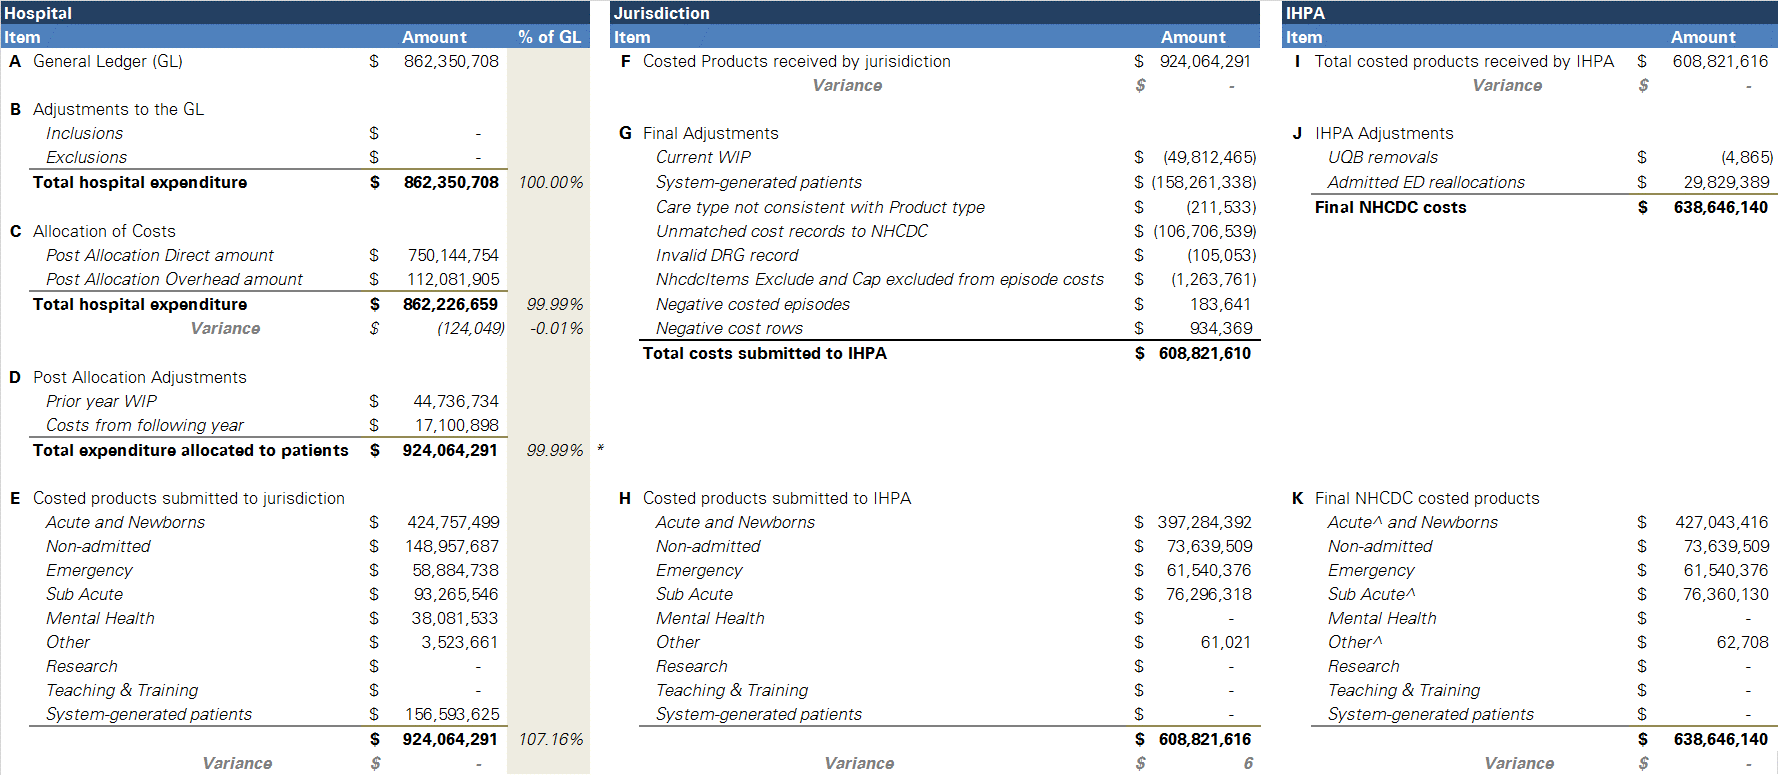 this table presents the financial reconciliation of expenditure for round 20 for the townsville hospital and health service and the transformation of this expenditure by the jurisdiction and ihpa for nhcdc submission. there are 11 items of reconciliation in the table. these items are labelled a to k. items a to e relate to the expenditure submitted by the hospital/lhn, items f to h relate to the costs submitted by the jurisdiction and items i to k relate to the transformation of costs by ihpa. the following section in the report explains each item in more detail.